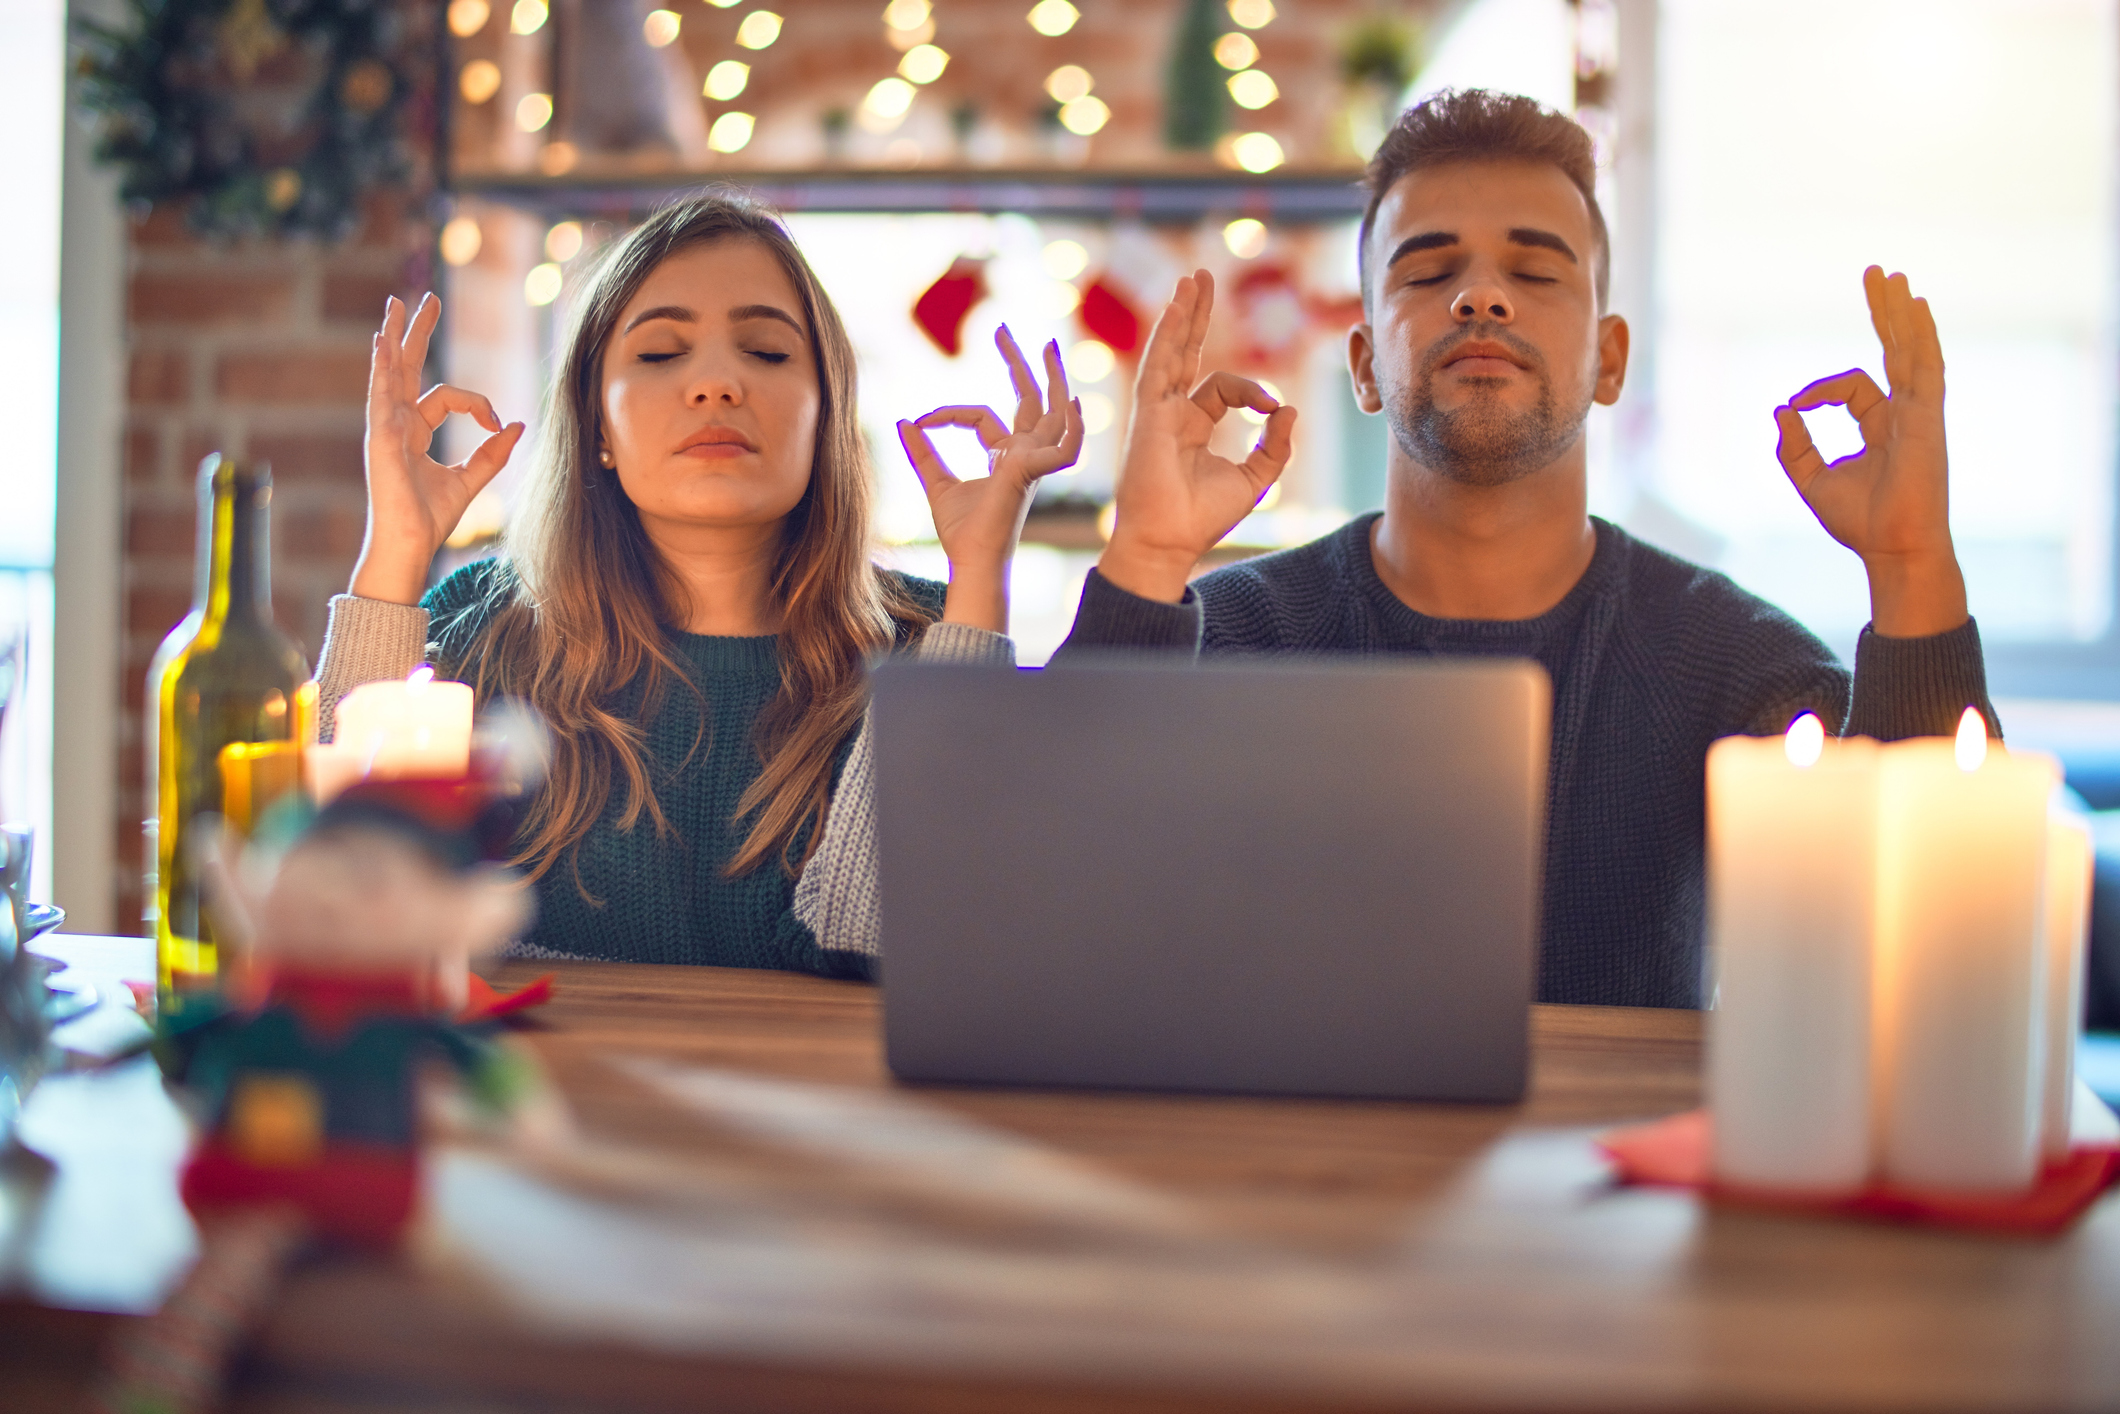 Man and woman meditating in front of an open laptop during the holidays